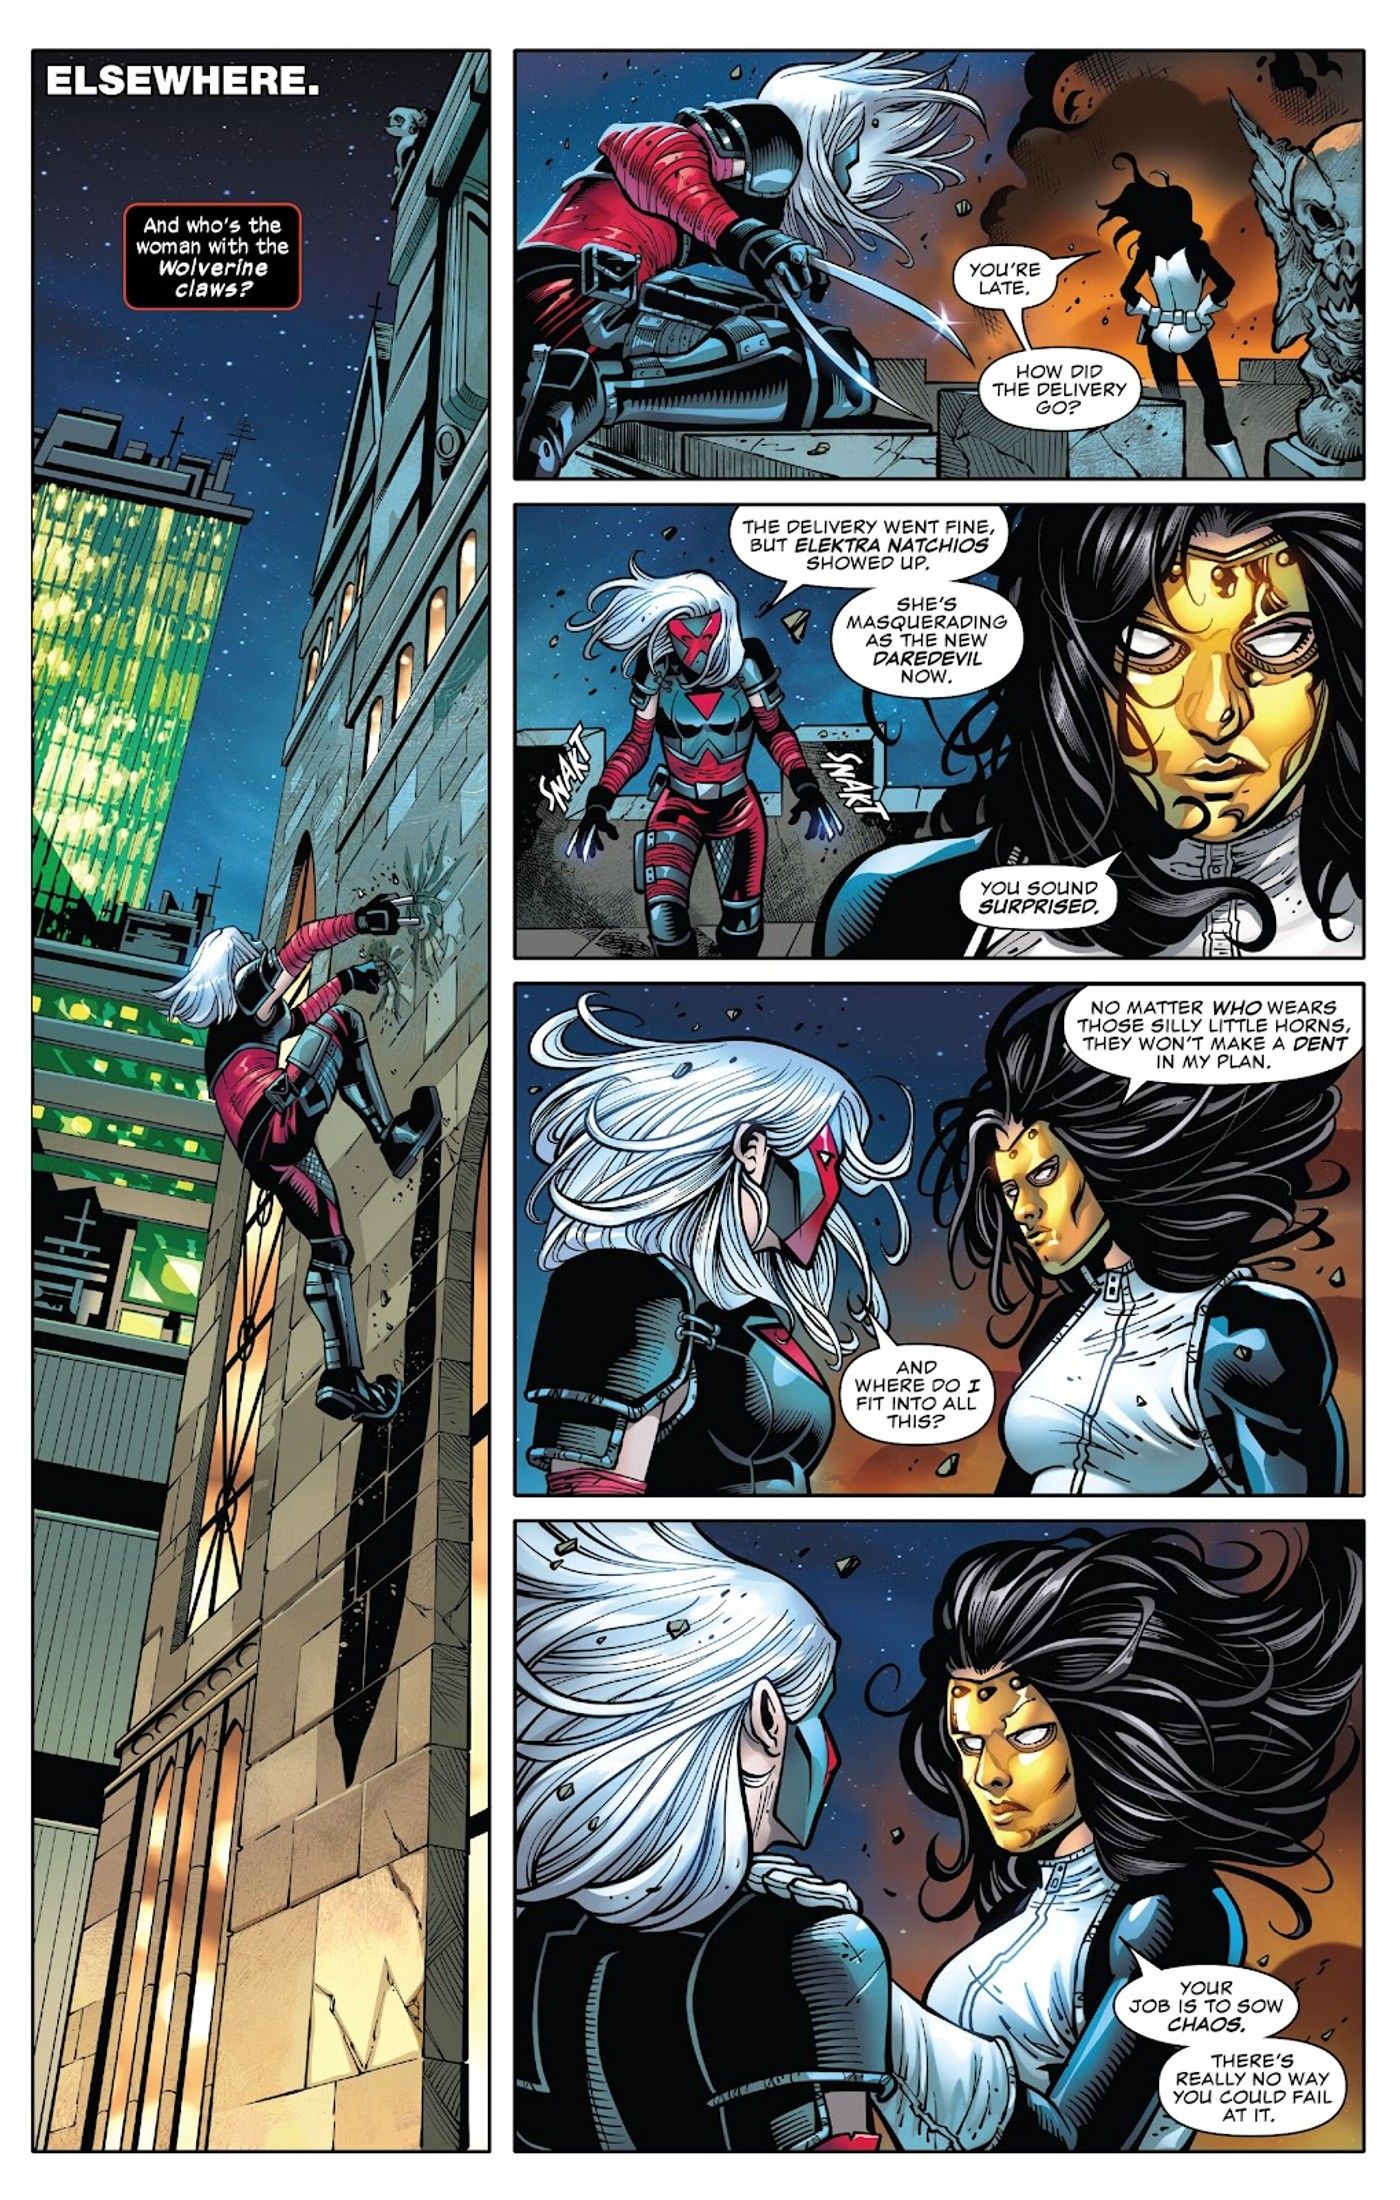 Bellona and Madame Masque talk on a rooftop